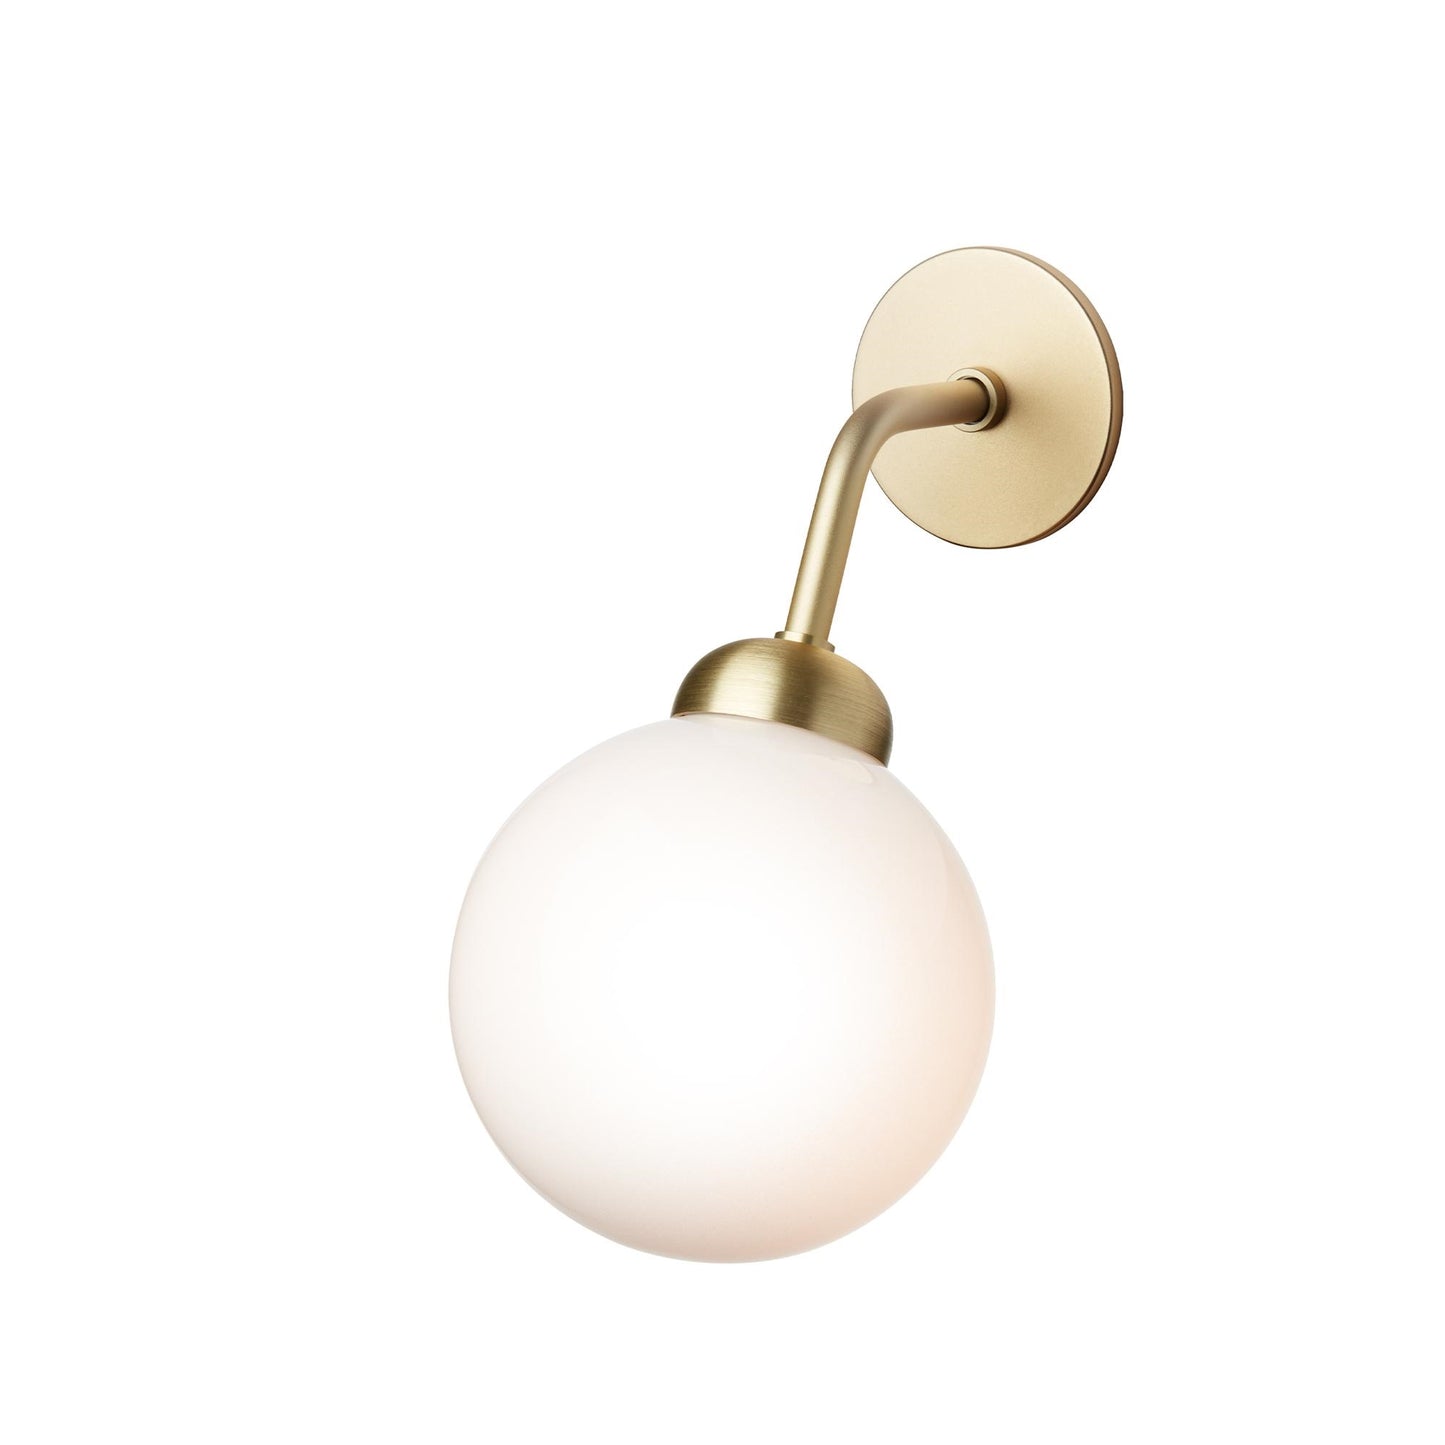 Apiales Hard-Wired Wall Lamp by Nuura #Brushed Brass / Hardwired